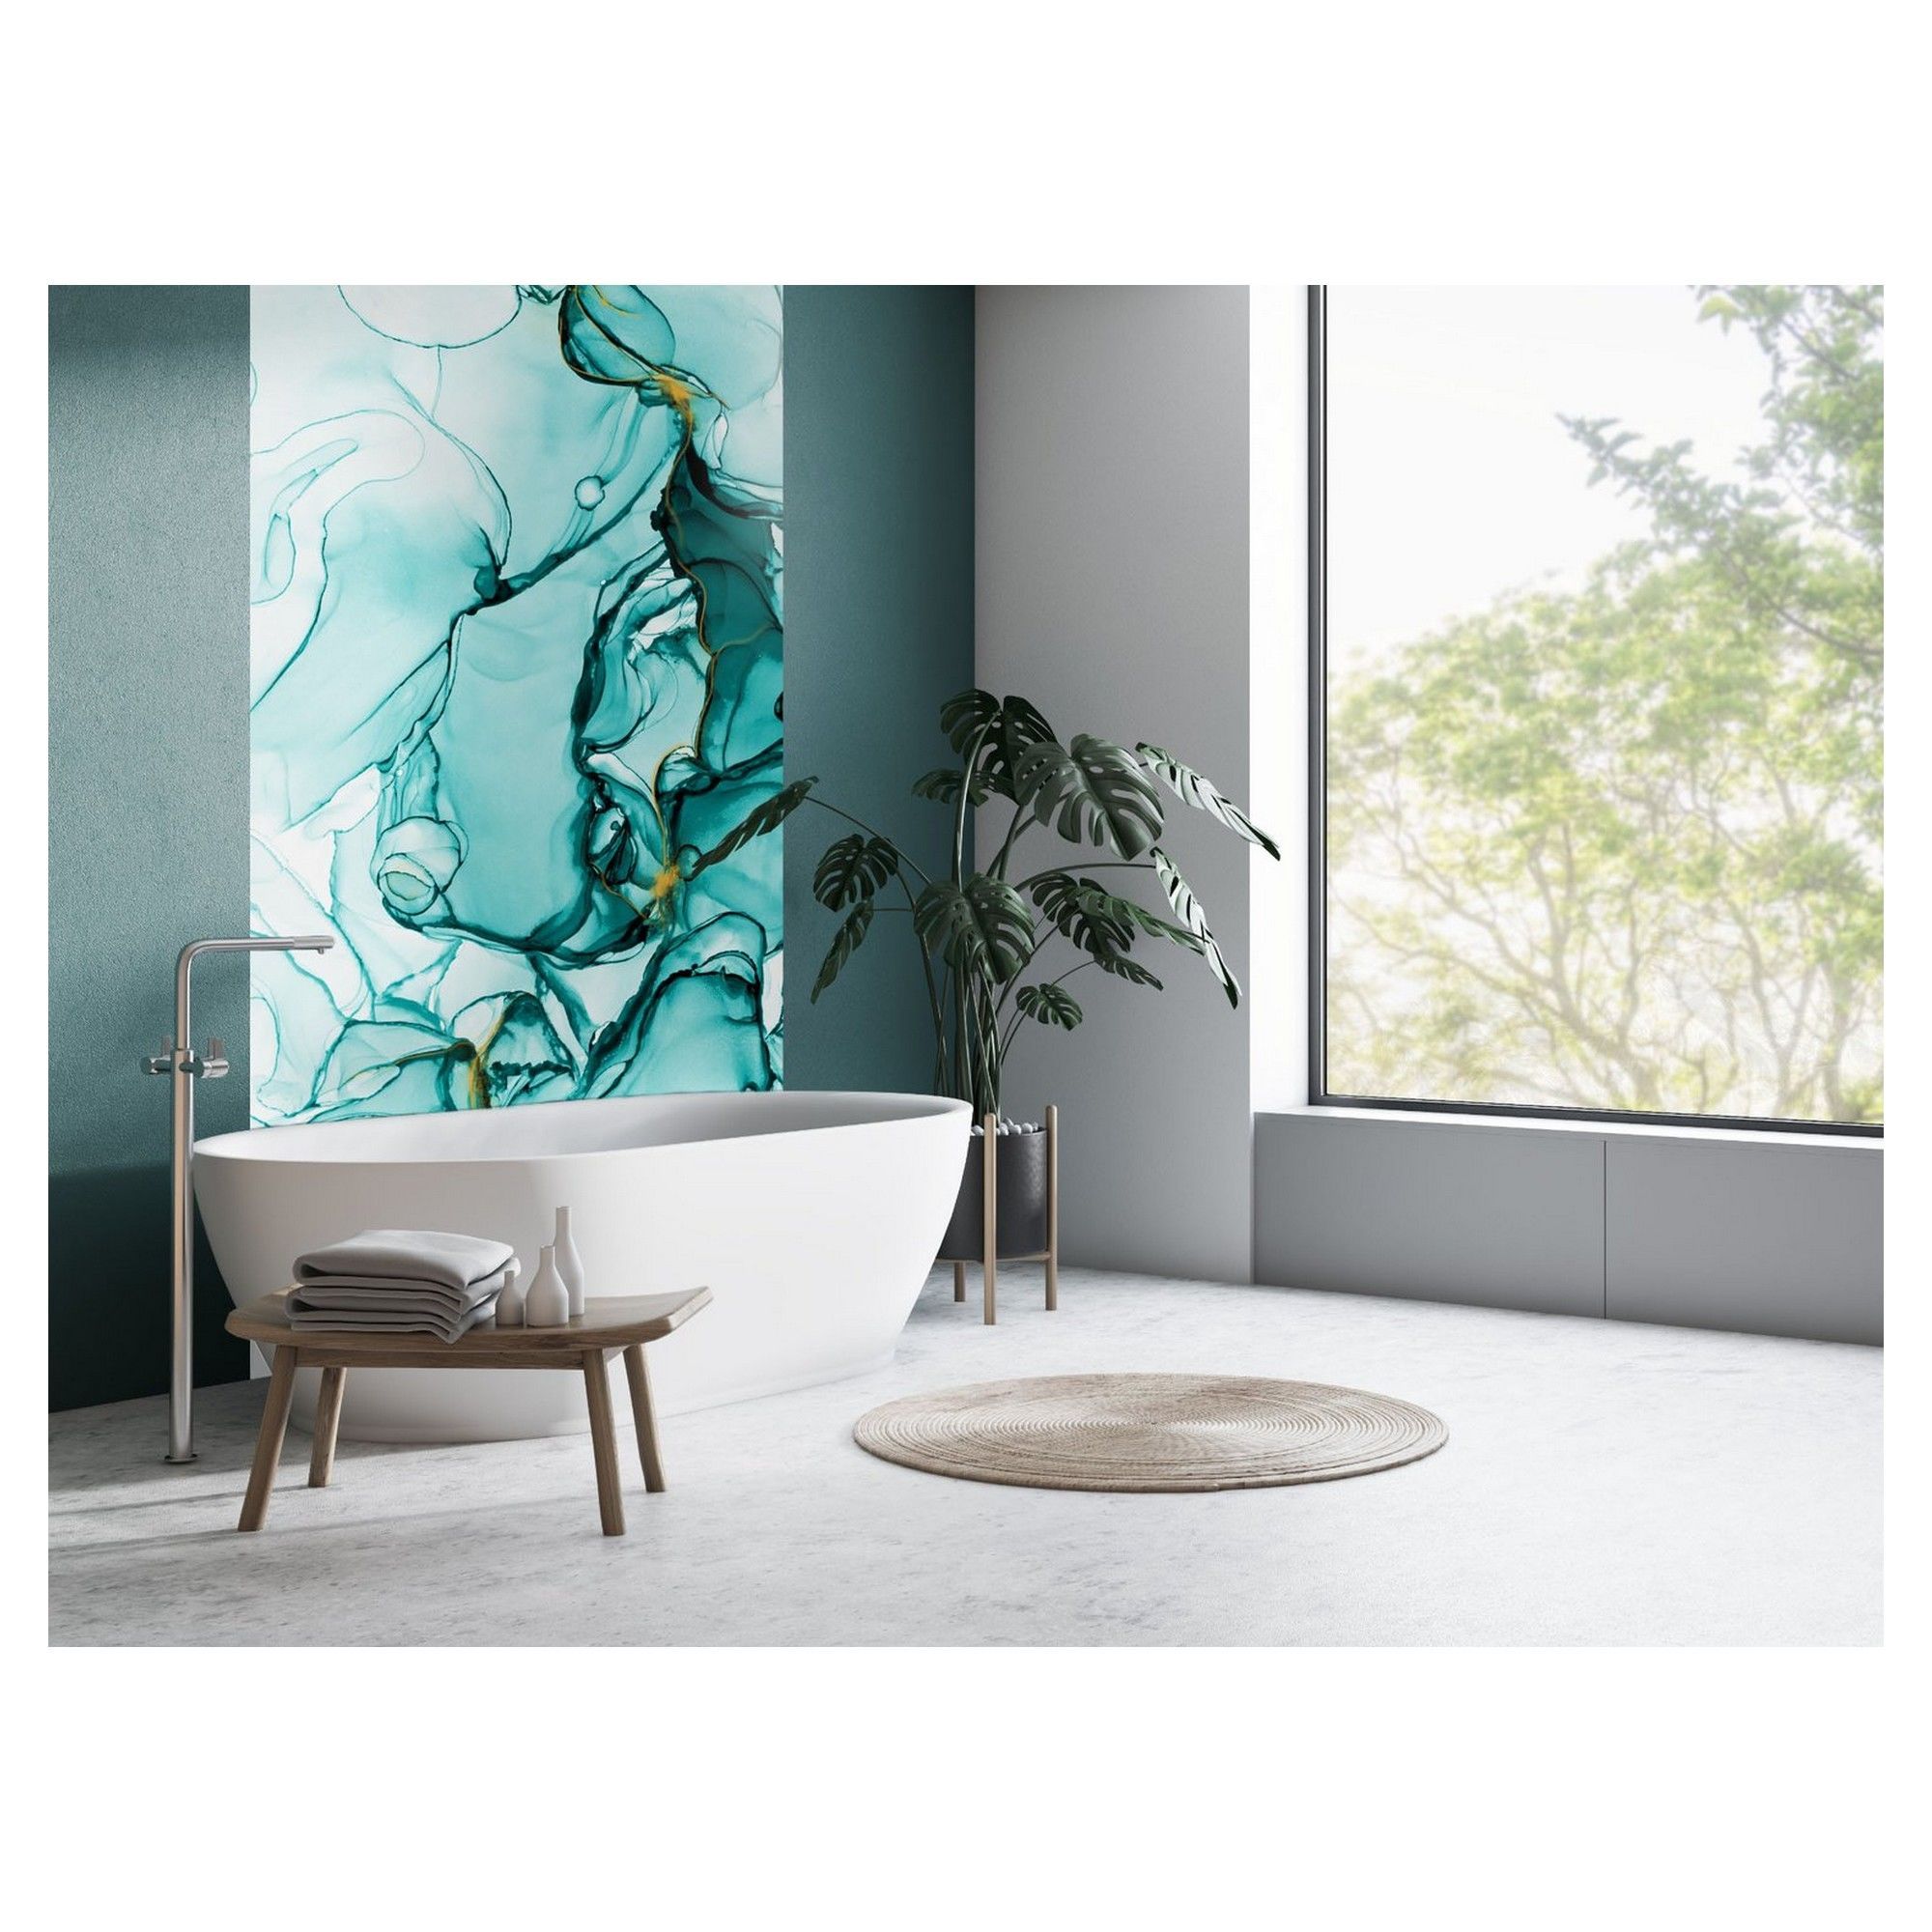 Surface Design Wall Panel – Glossy - Turquoise Blossom – 47.25 x 96 x  0.17